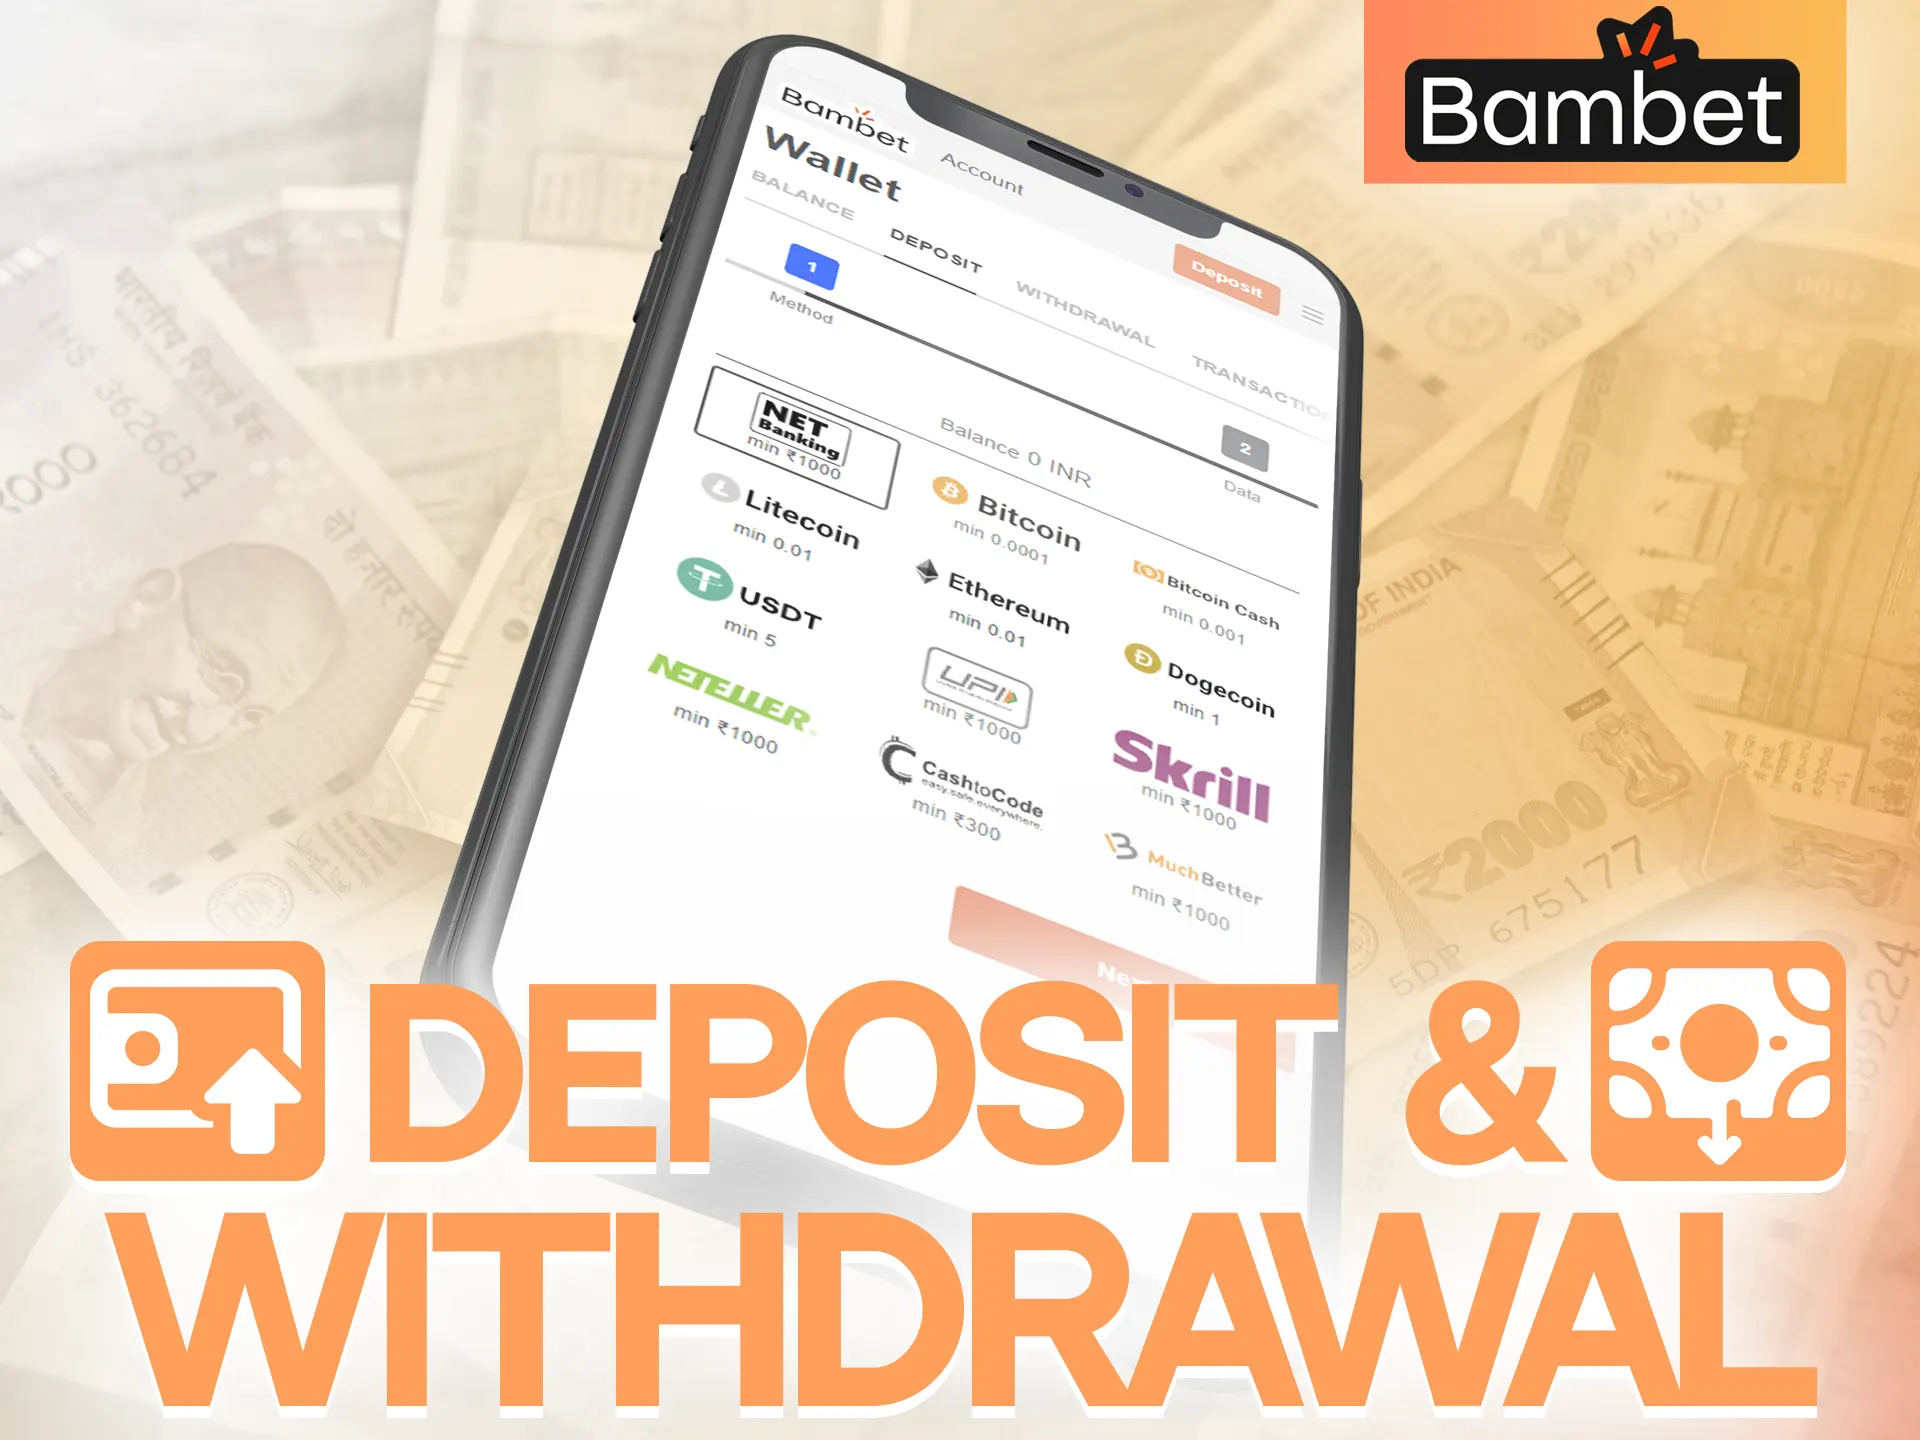 There are various deposit and withdrawal methods available in the Bambet app.